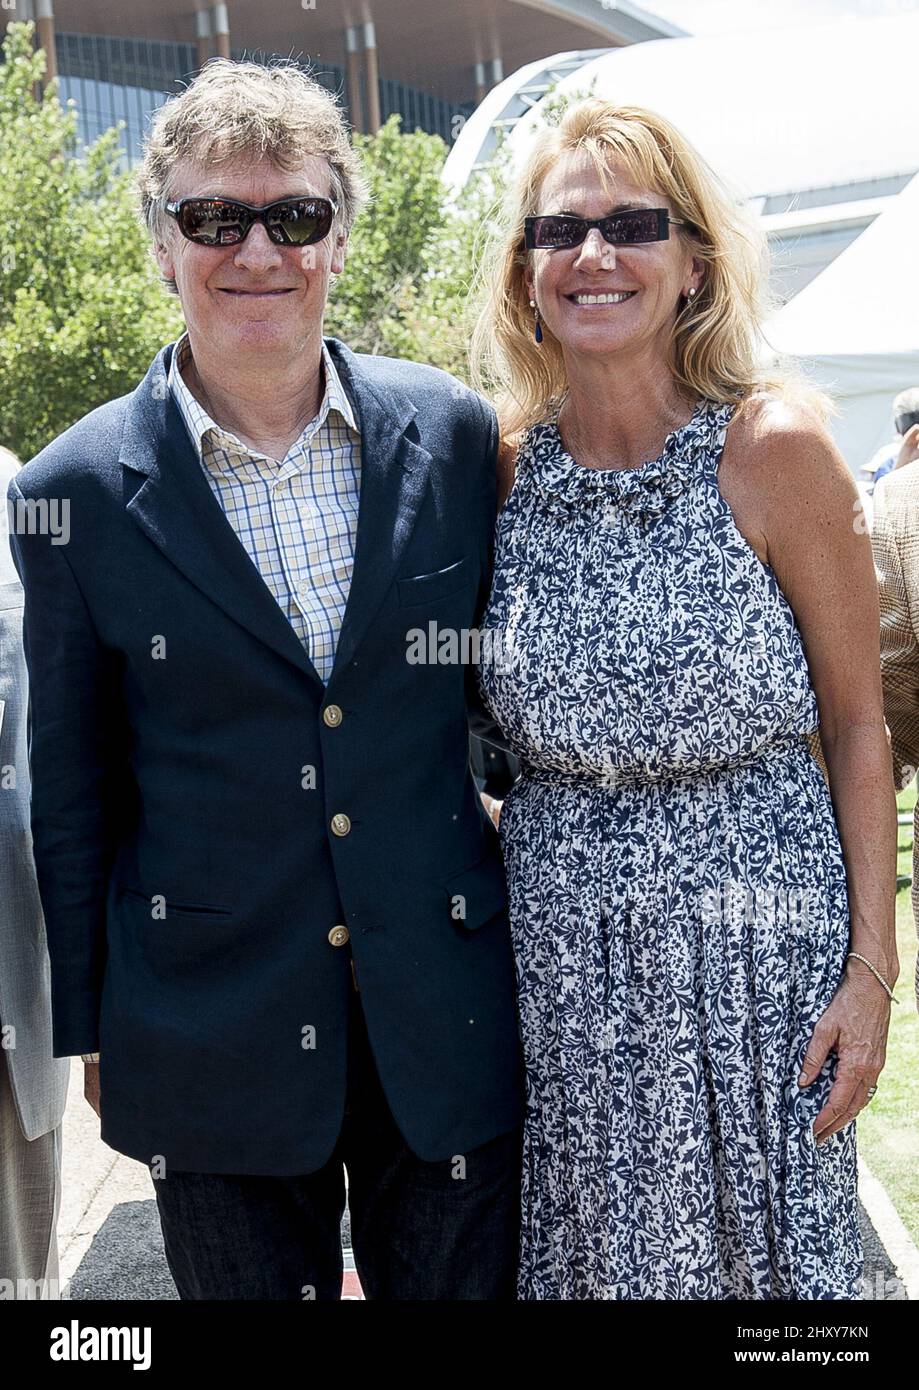 Steve Winwood and Eugenia Winwood as Steve Winwood is honoured at the 2012 Music City Walk of Fame Induction Ceremony in Nashville, USA. Stock Photo